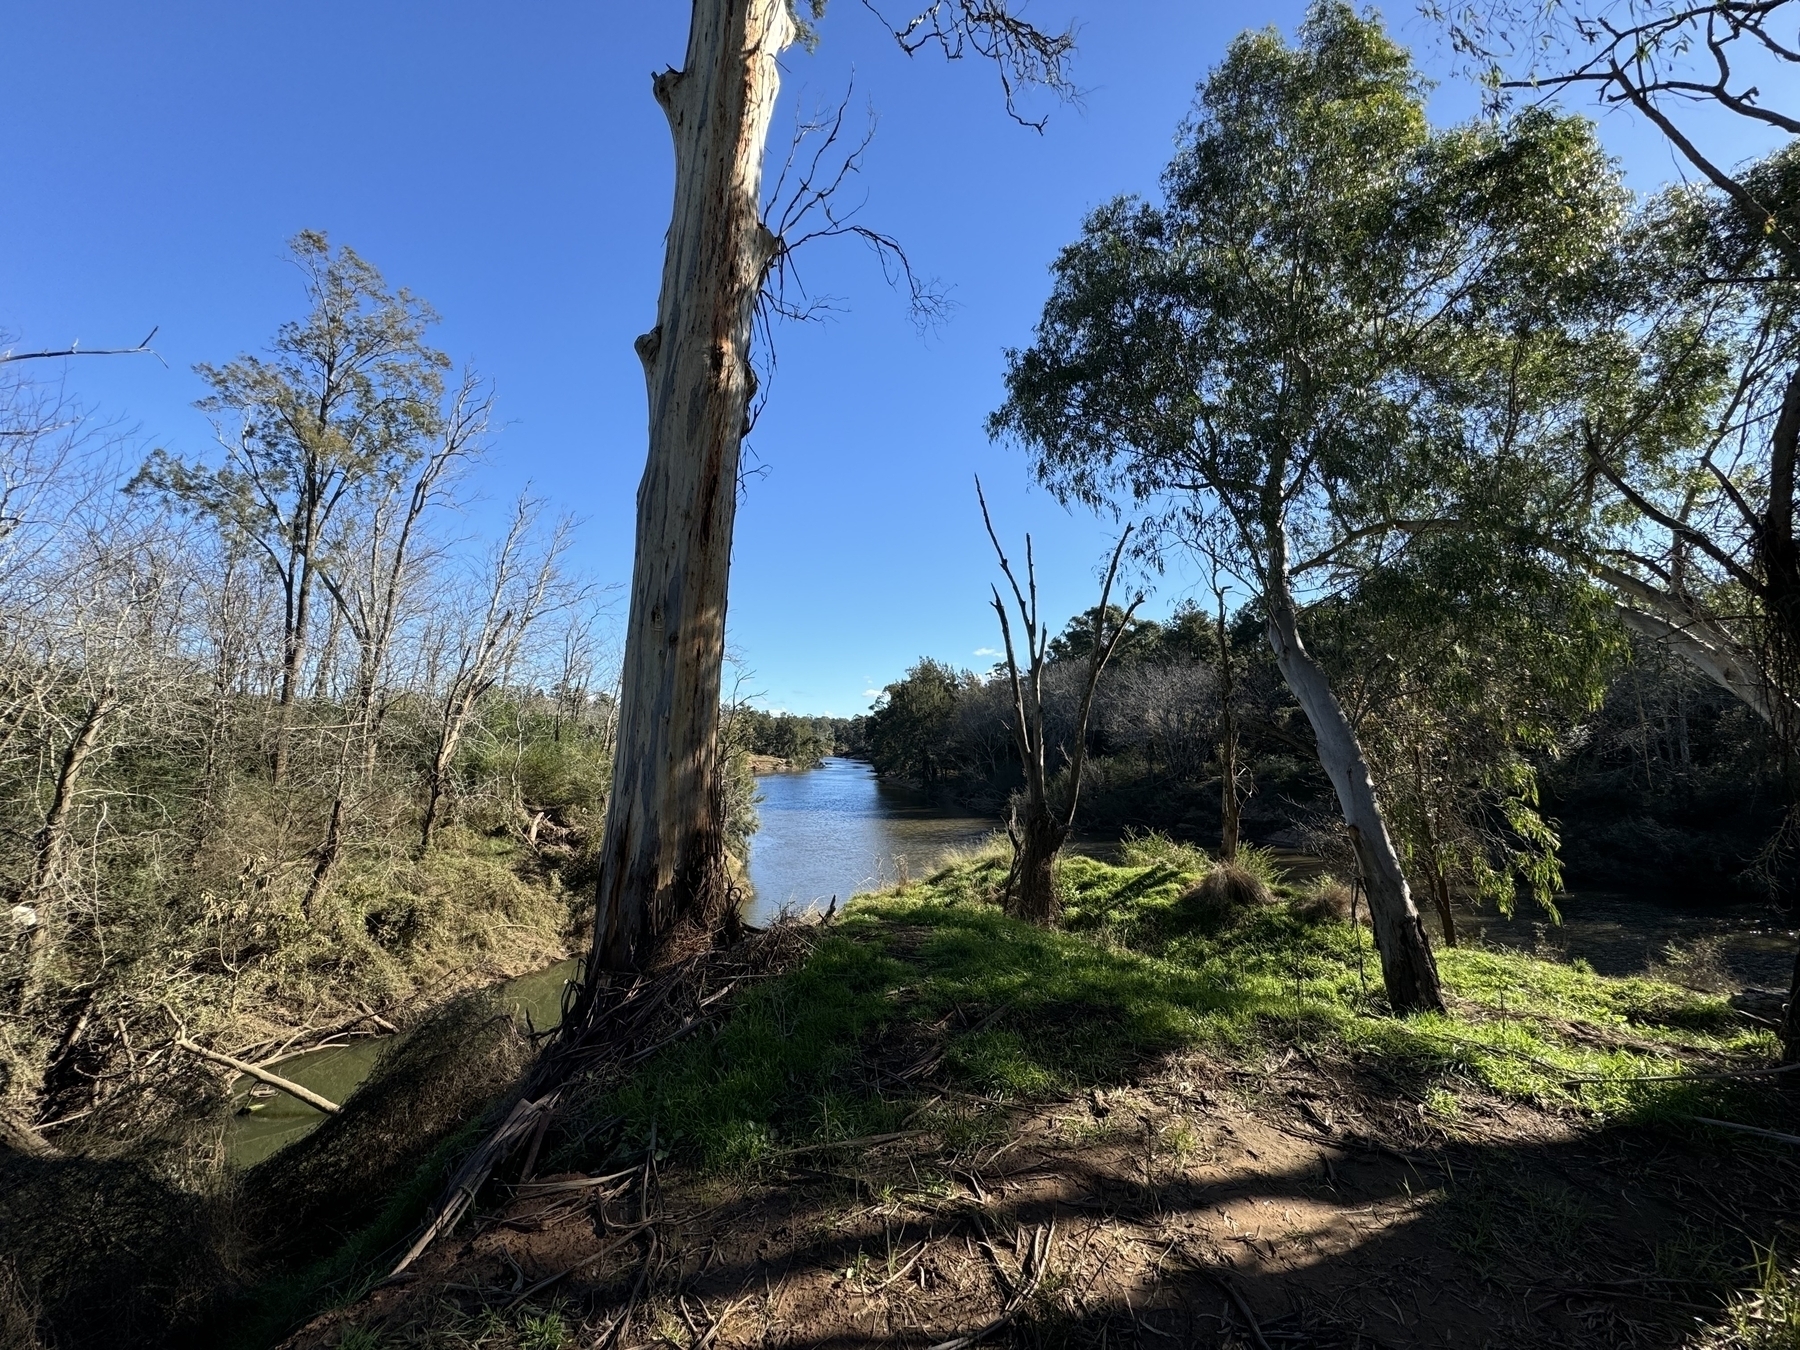 The Nepean river lookout again where it connects with a creek and trees in the foreground